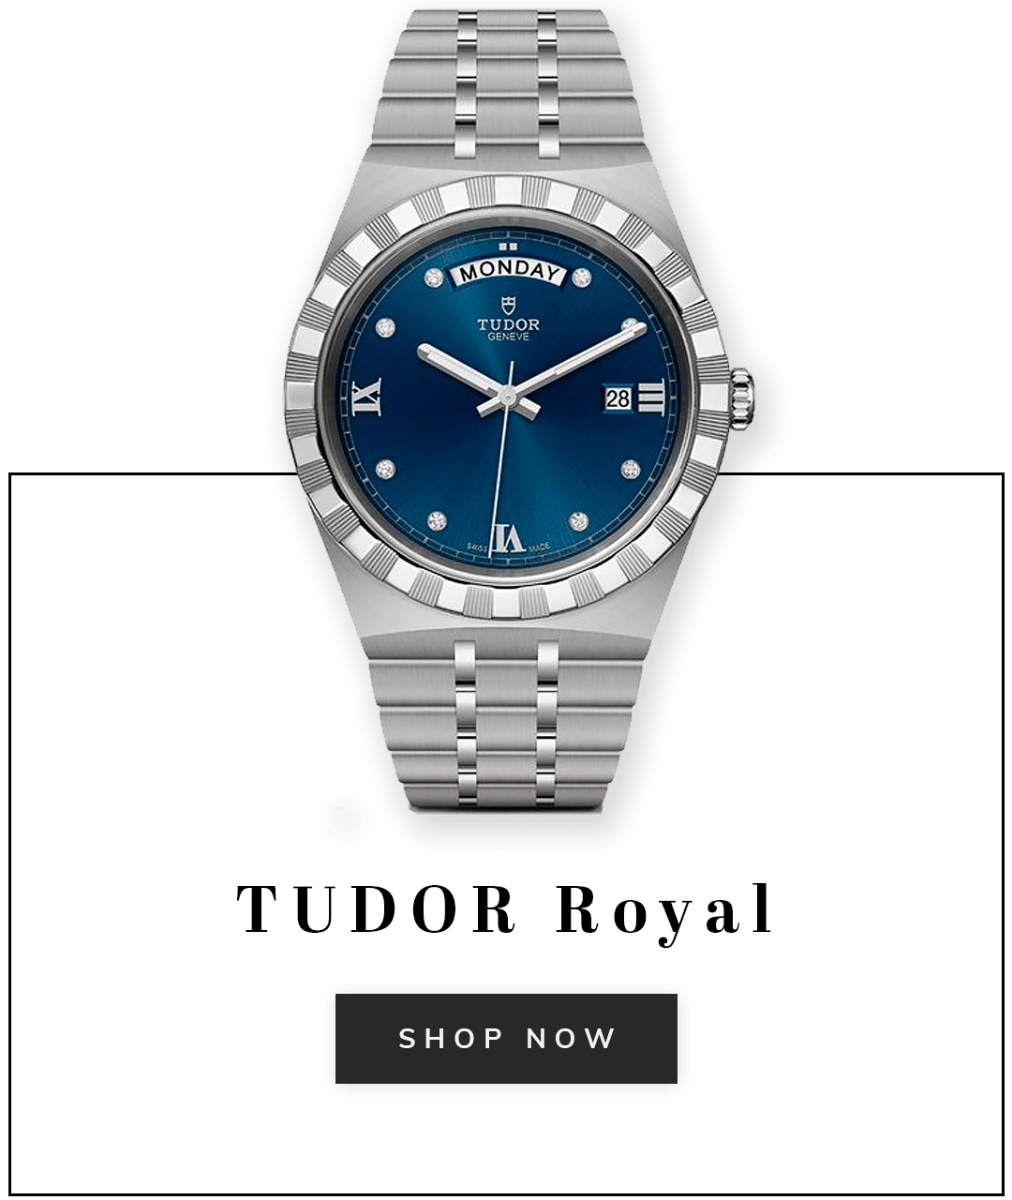 A Tudor Royal watch with text shop now